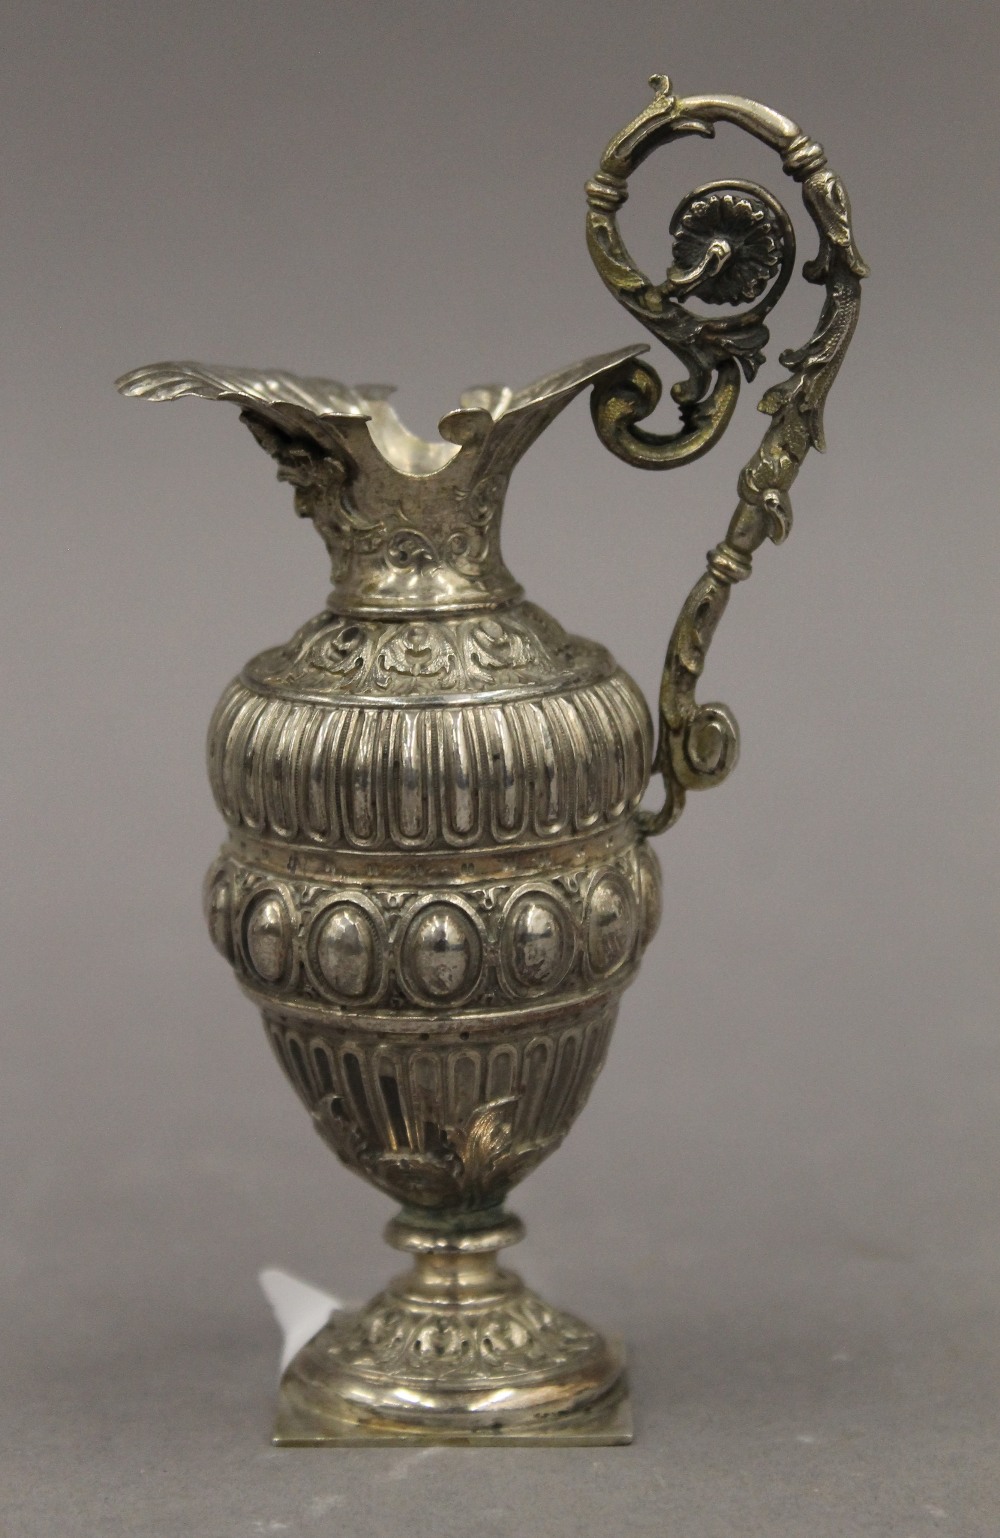 A miniature antique silver ewer, impressed mark G Accarisi Firenze. 11.5 cm high. 72 grammes. - Image 2 of 5